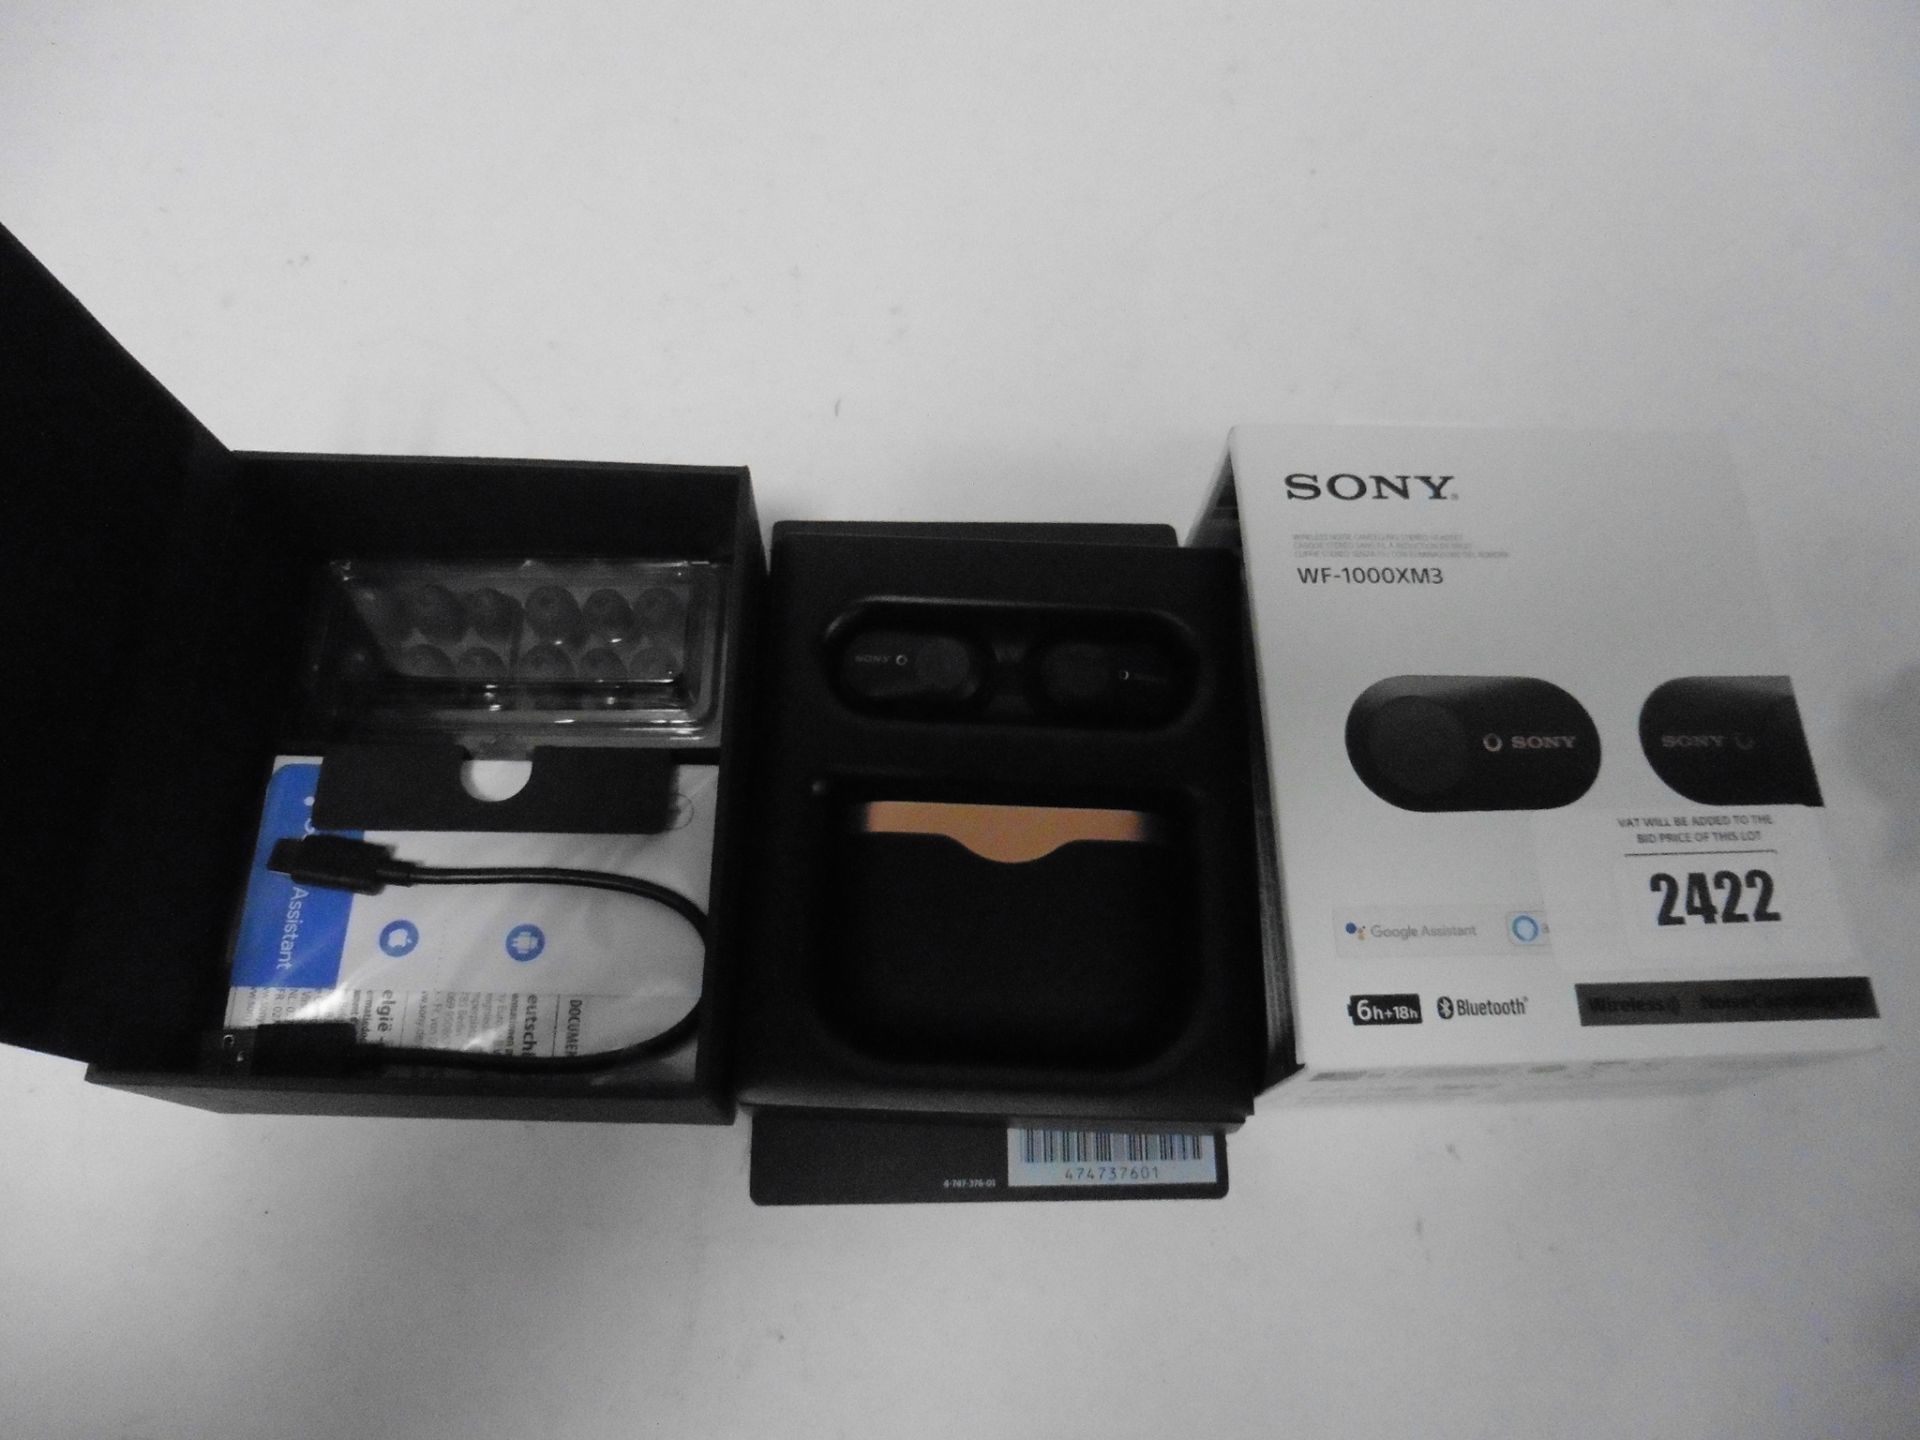 Pair Sony WF-1000XM3 noise cancelling ear buds with box